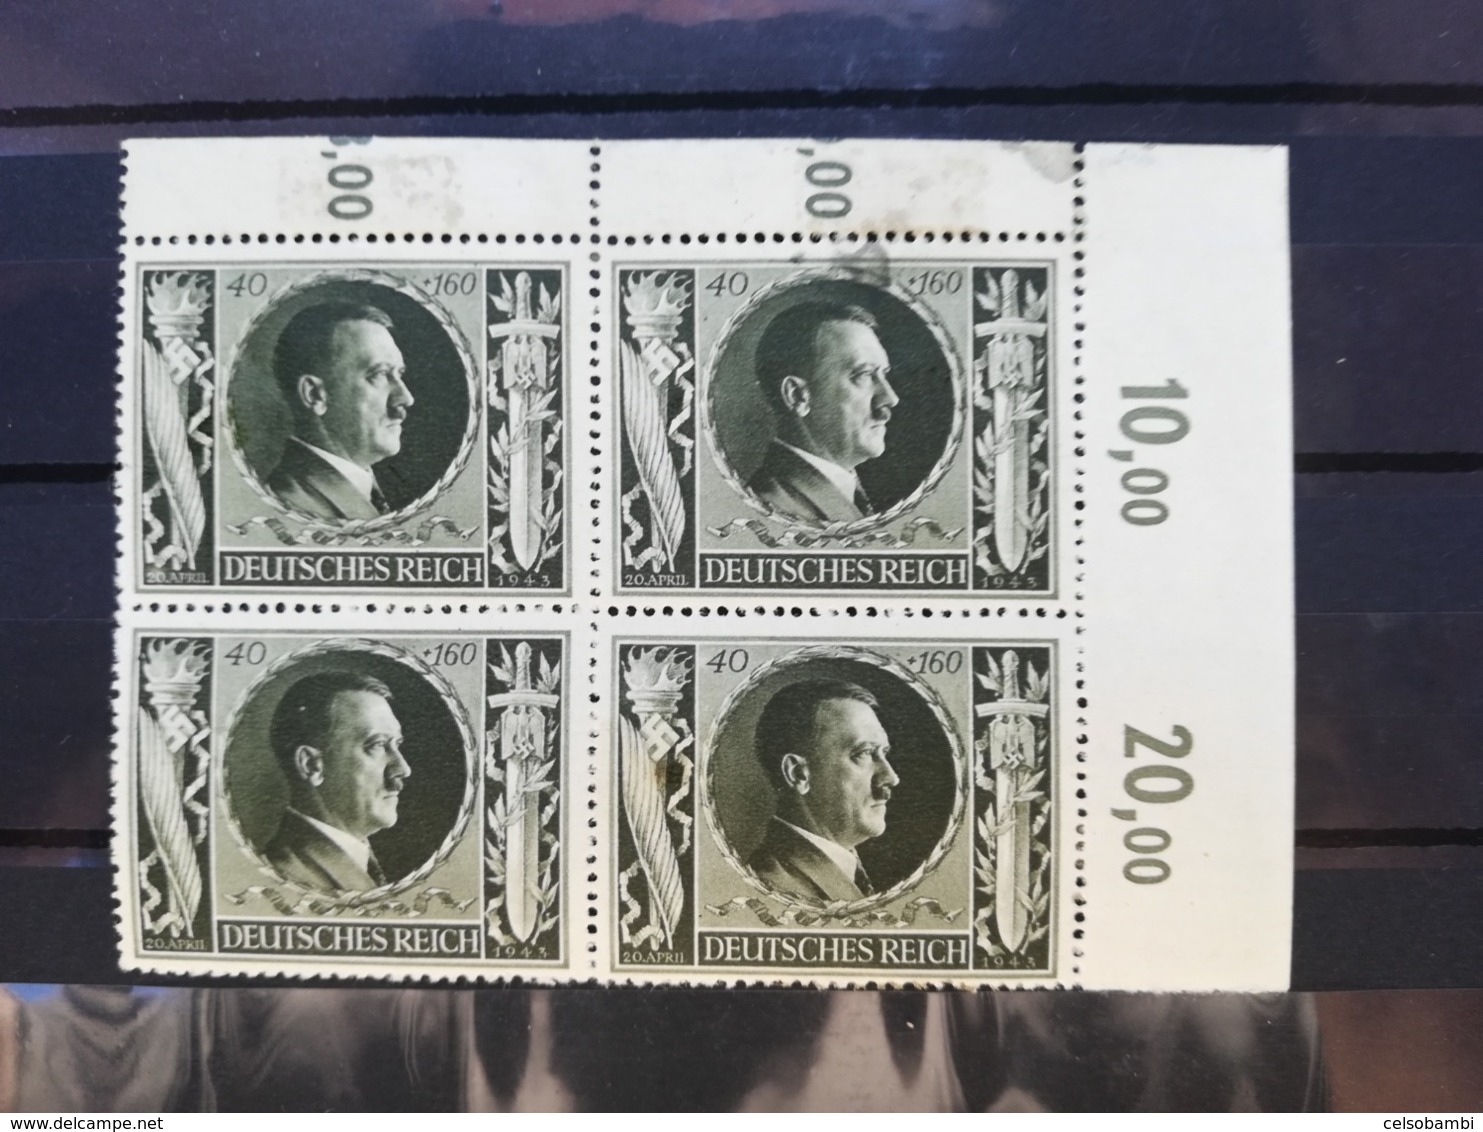 GERMANY 1943 The 54th Anniversary of the Birth of Adolf Hitler  6 BLOCKS OF 4 STAMPS  NEW STAMPS (e+d)